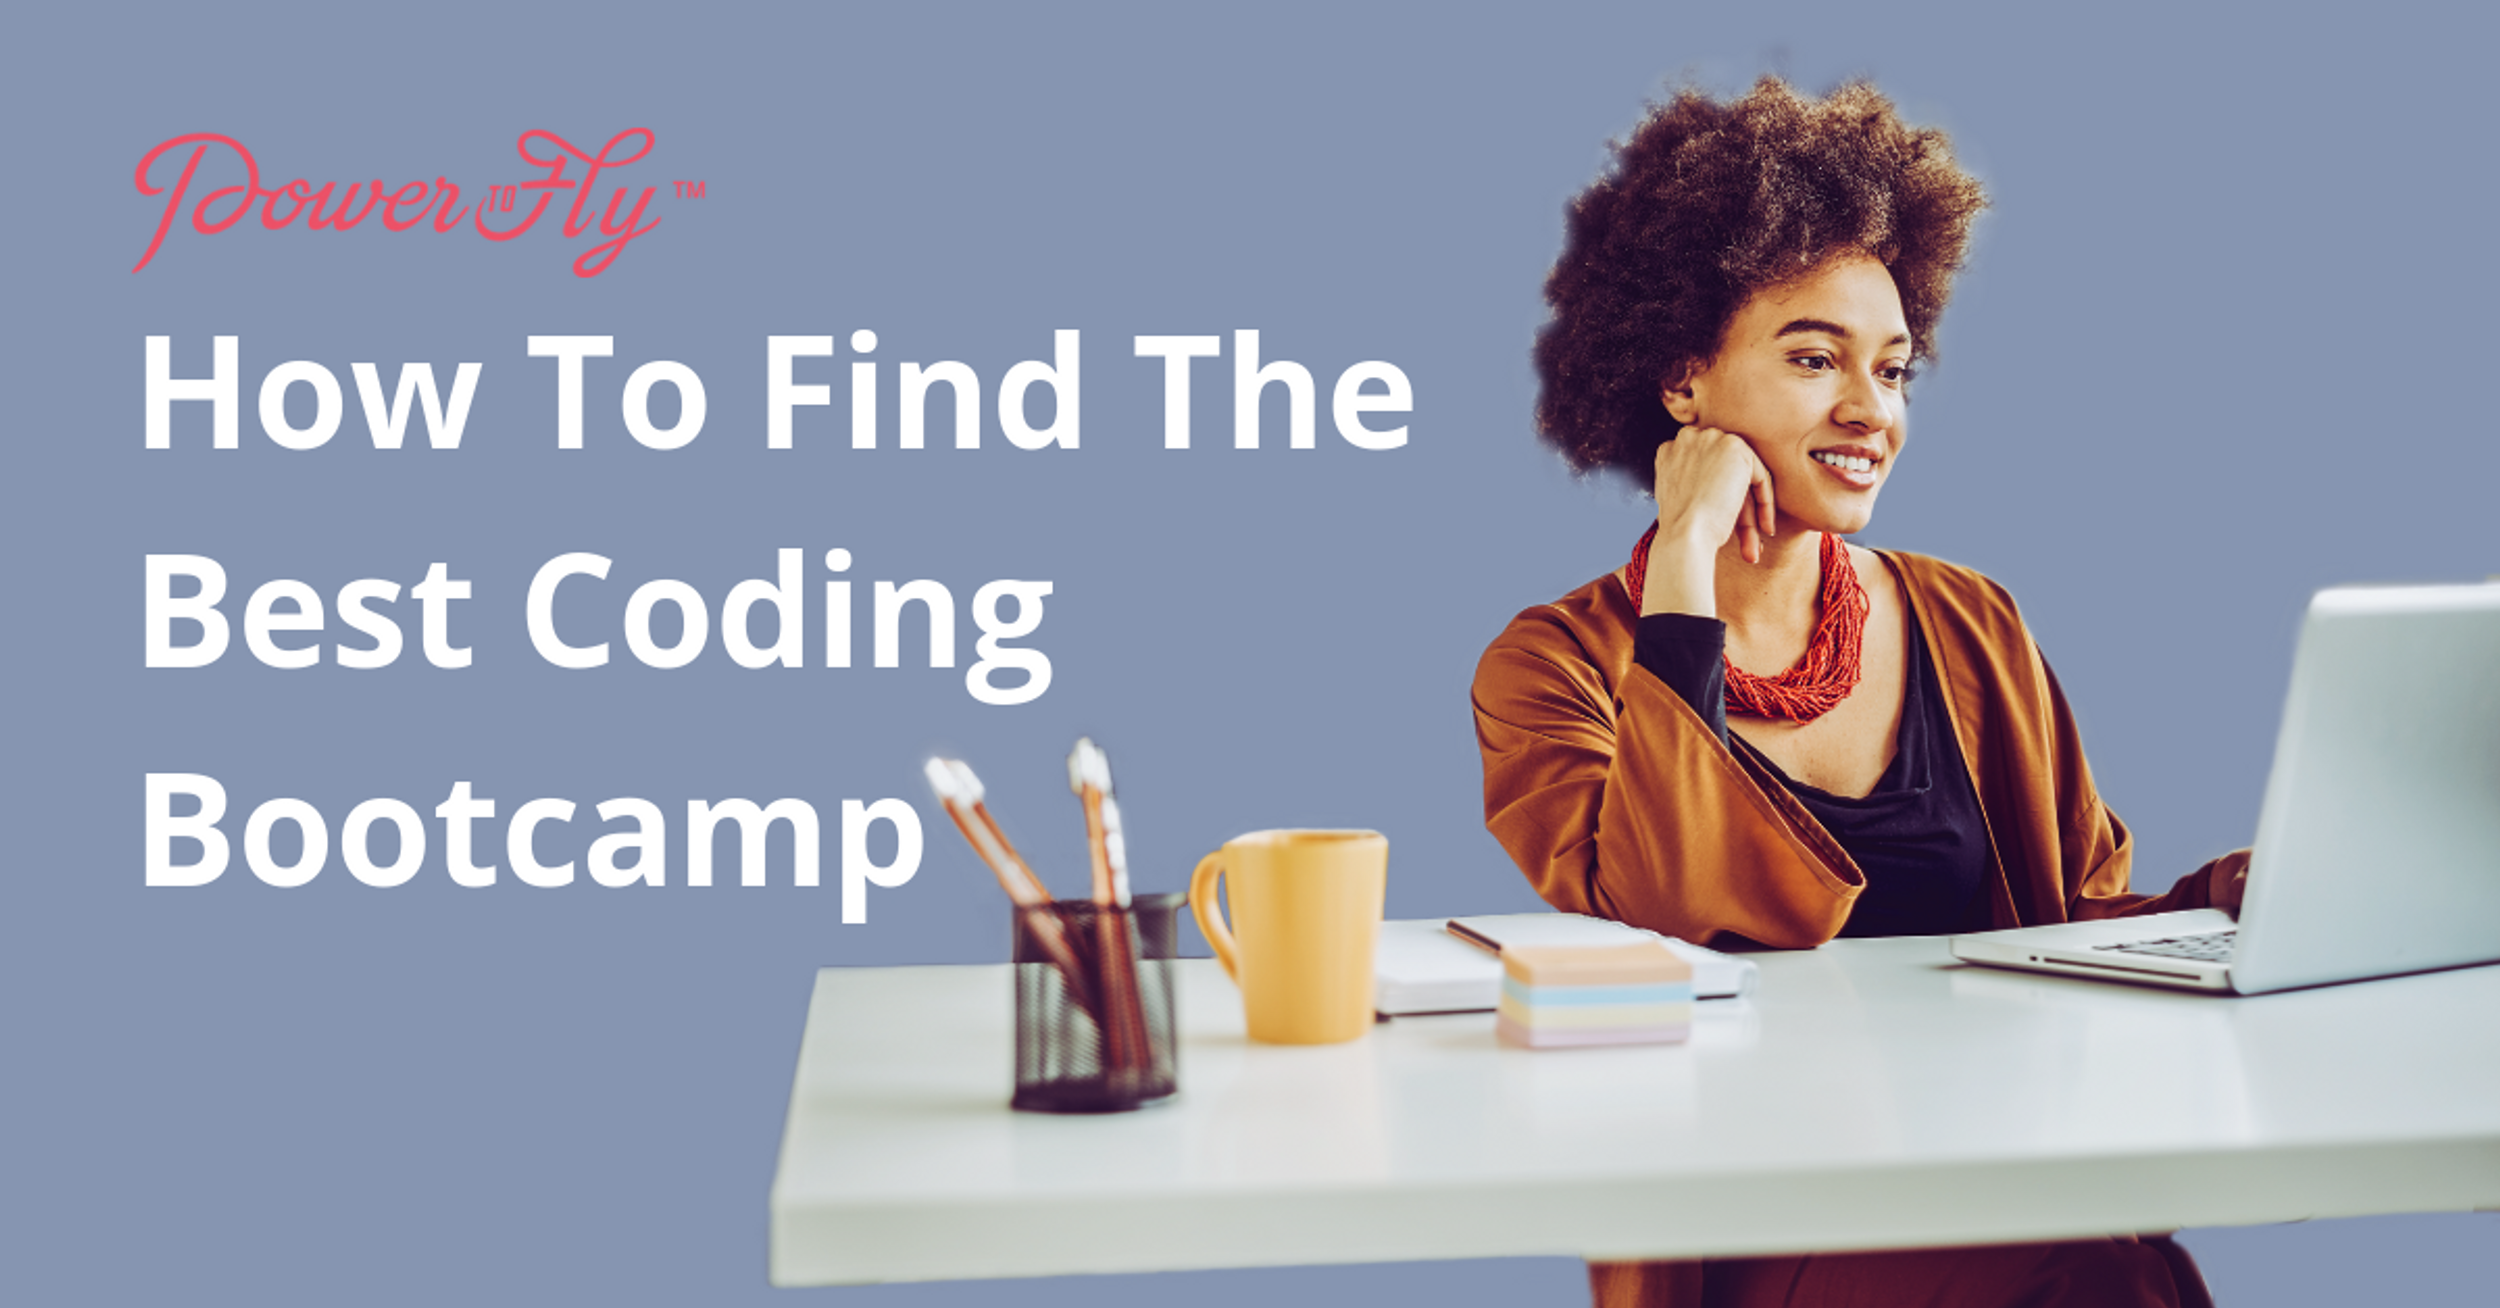 How To Find The Best Coding Bootcamp For You In 2020 - We Asked Experts